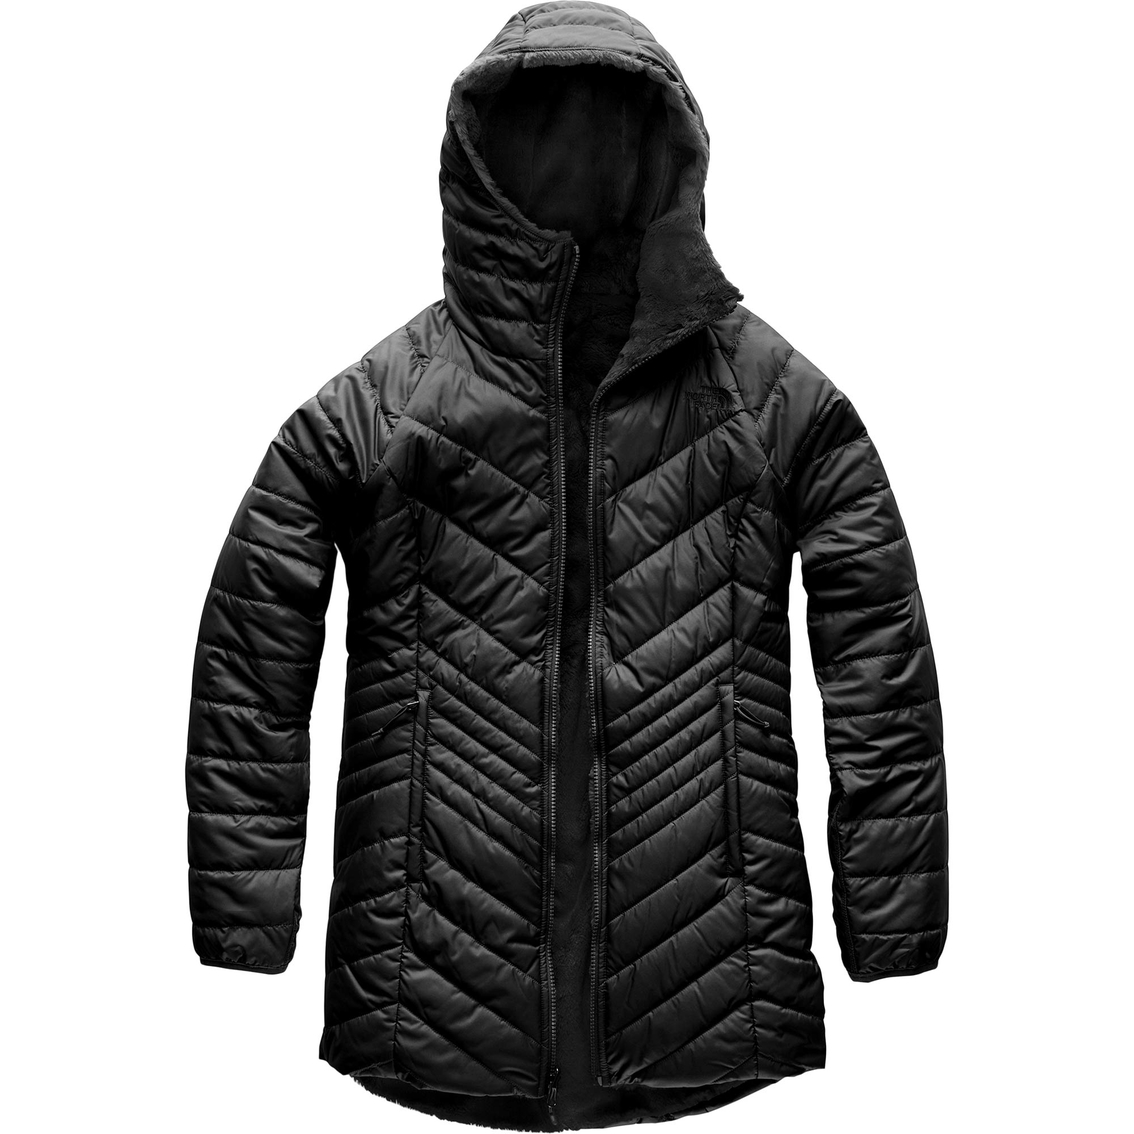 The North Face Mossbud Insulated Reversible Parka Jacket NF0A3MESH2G The North Face ktmart 0